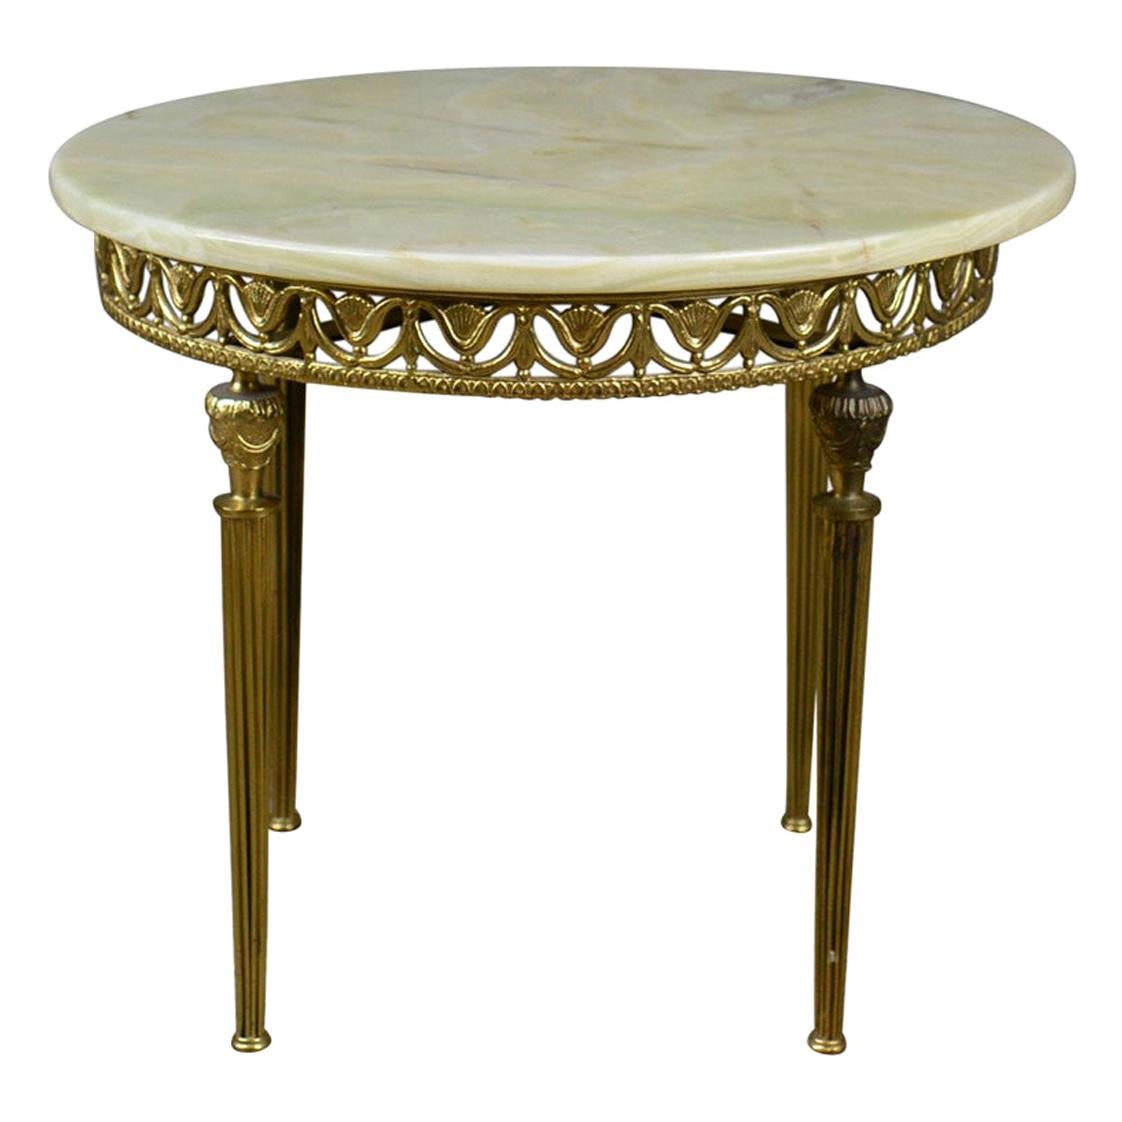 Italianate Lamp Table Gilt Metal Onyx Classical Revival, Side, Late 20th Century